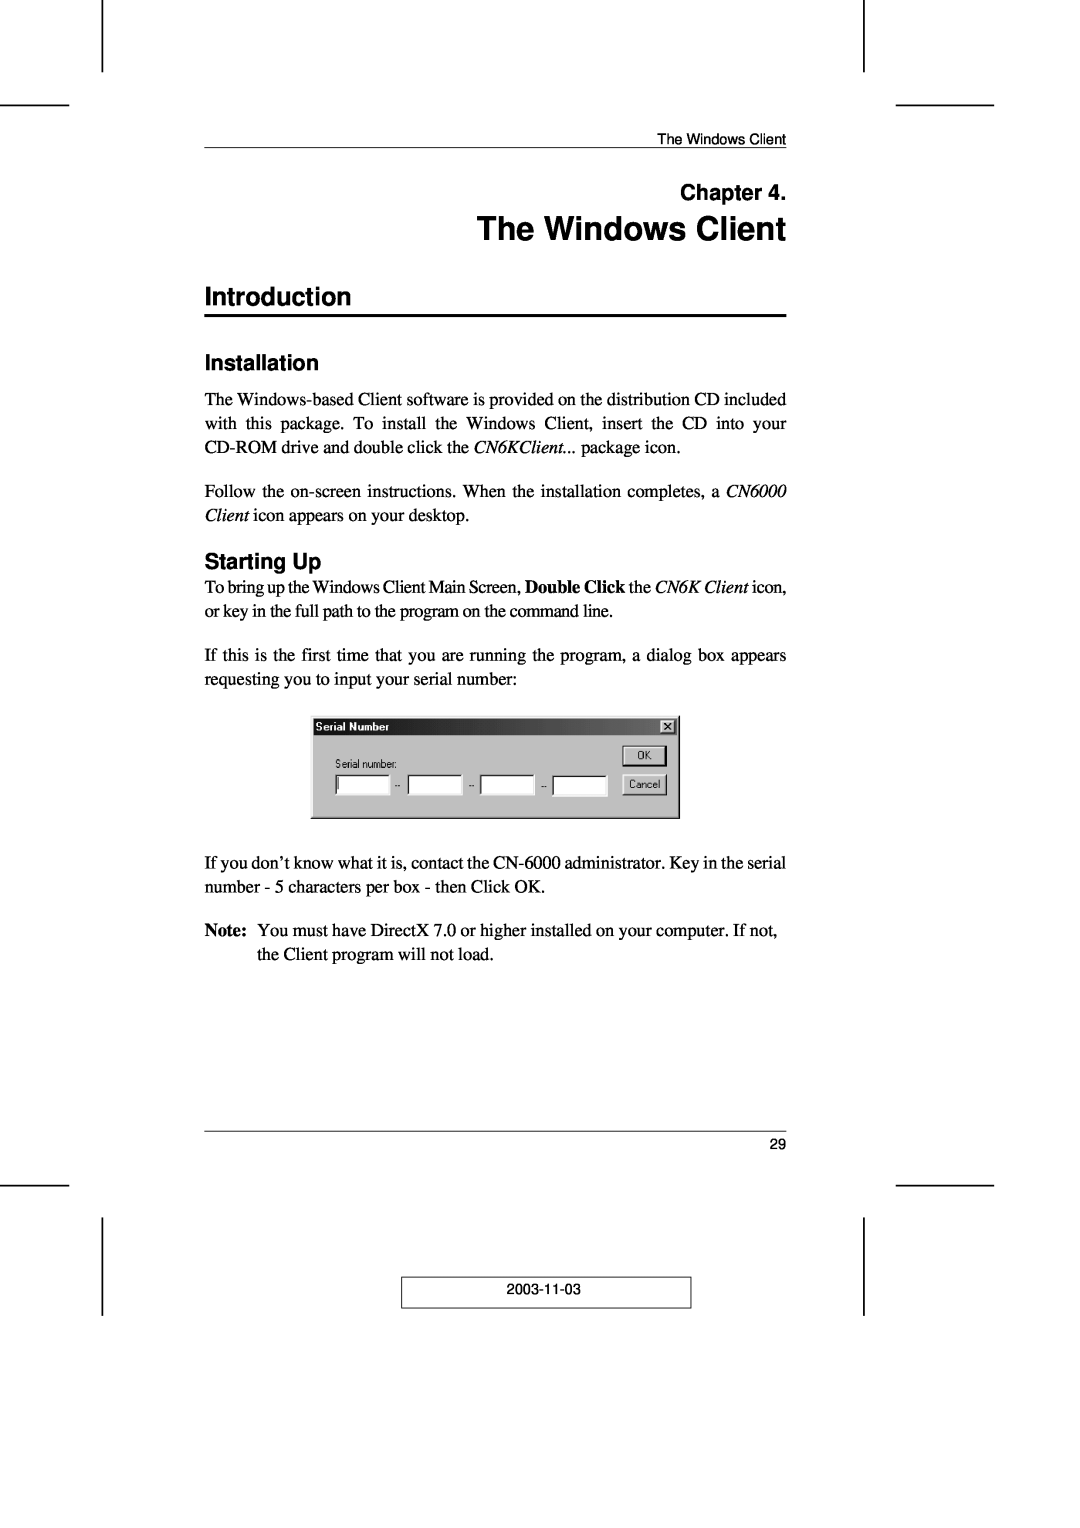 ATEN Technology CN-6000 user manual The Windows Client, Introduction, Chapter, Installation, Starting Up 